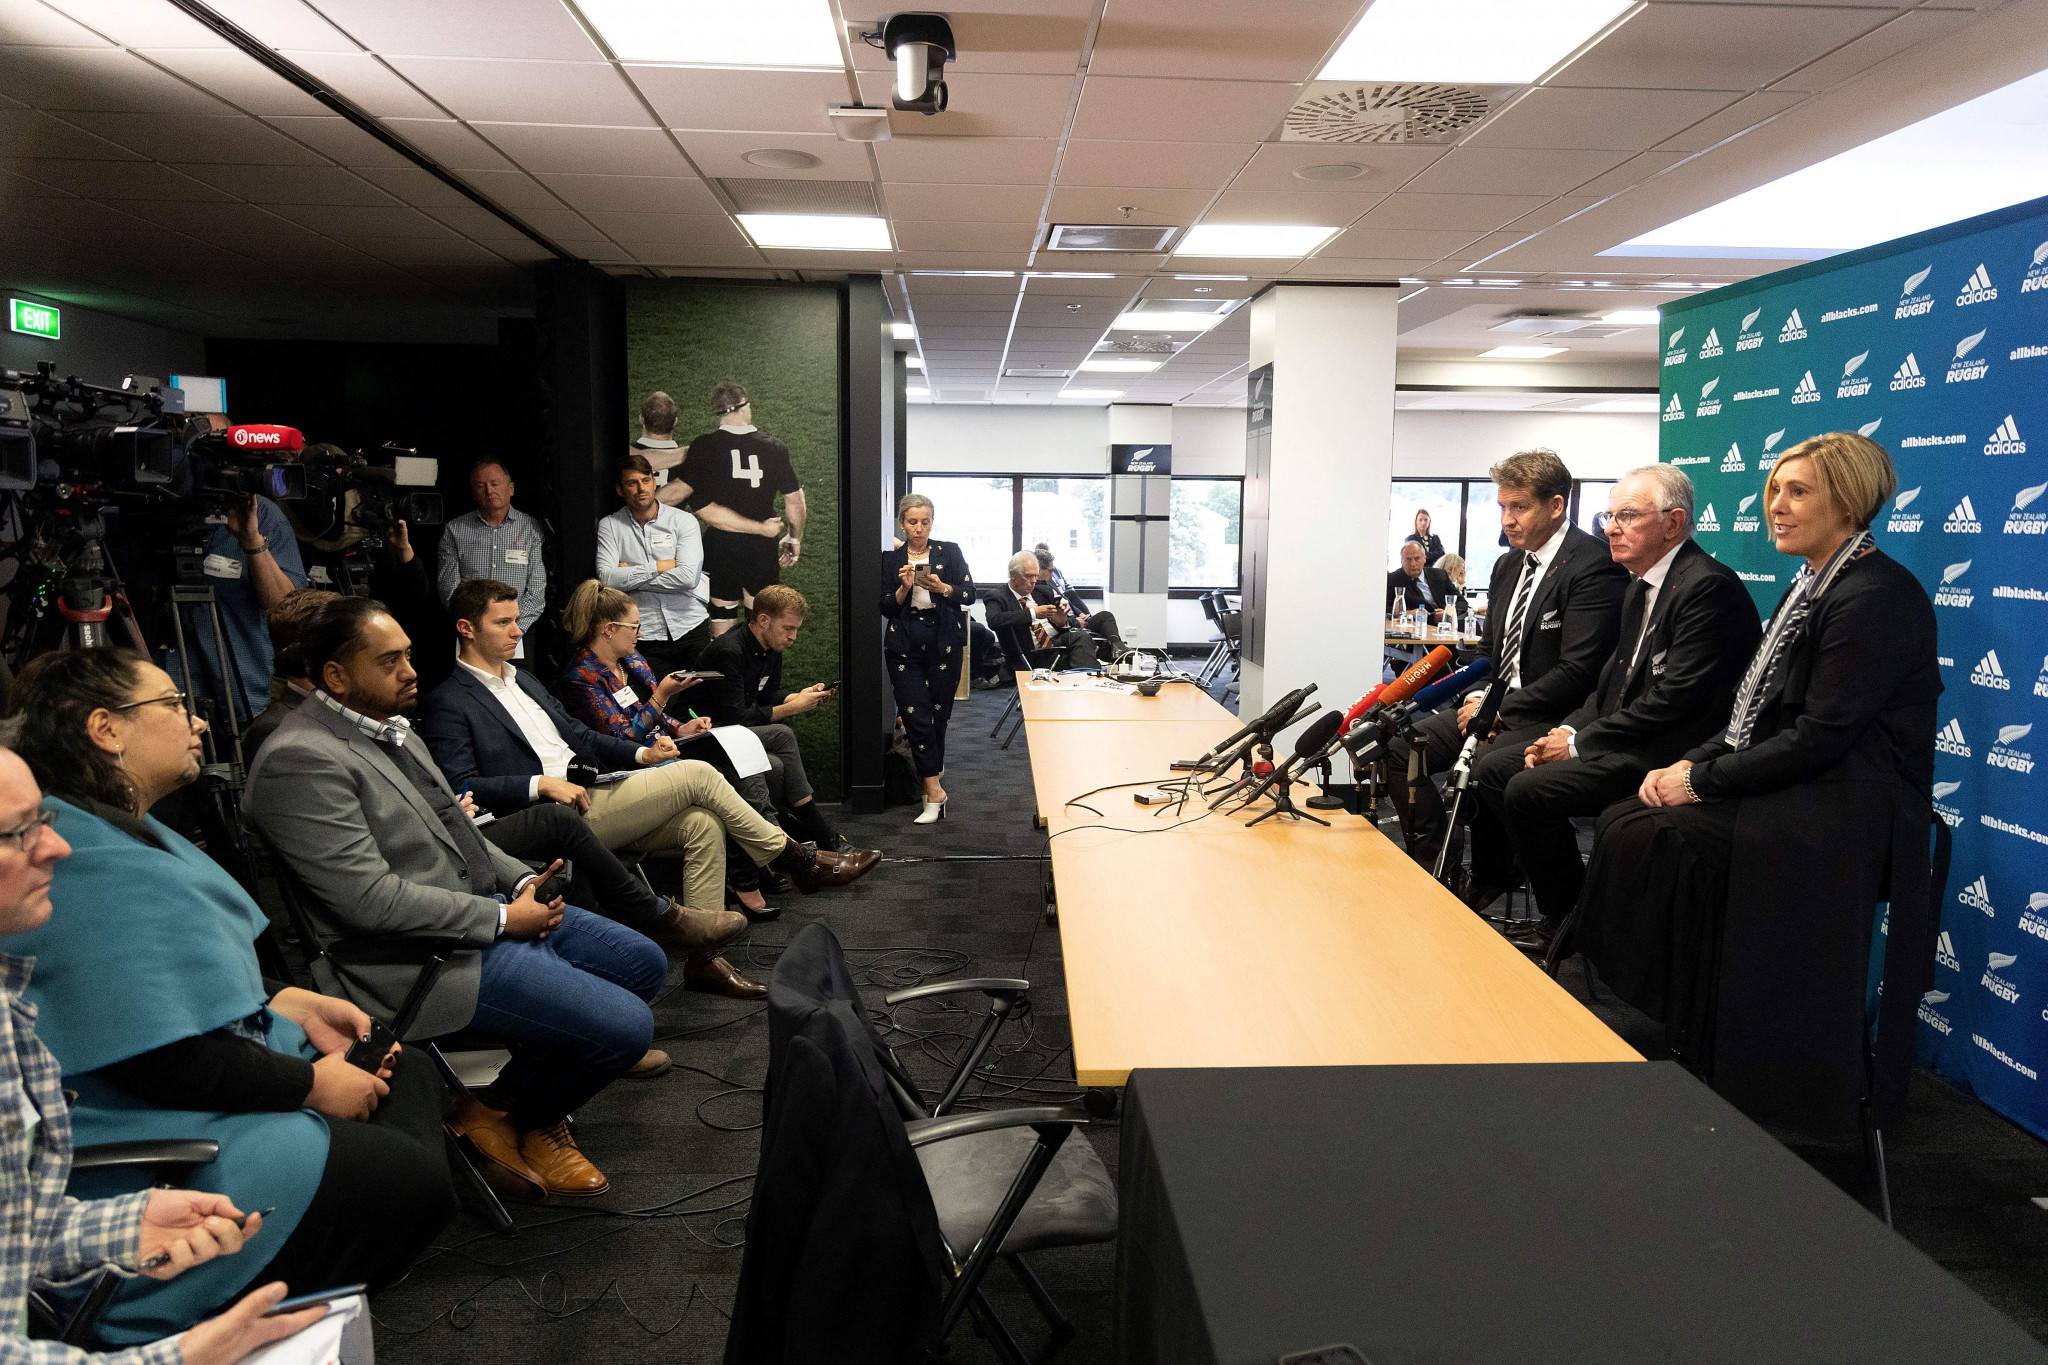 New Zealand Rugby announces loss and approves private equity investment